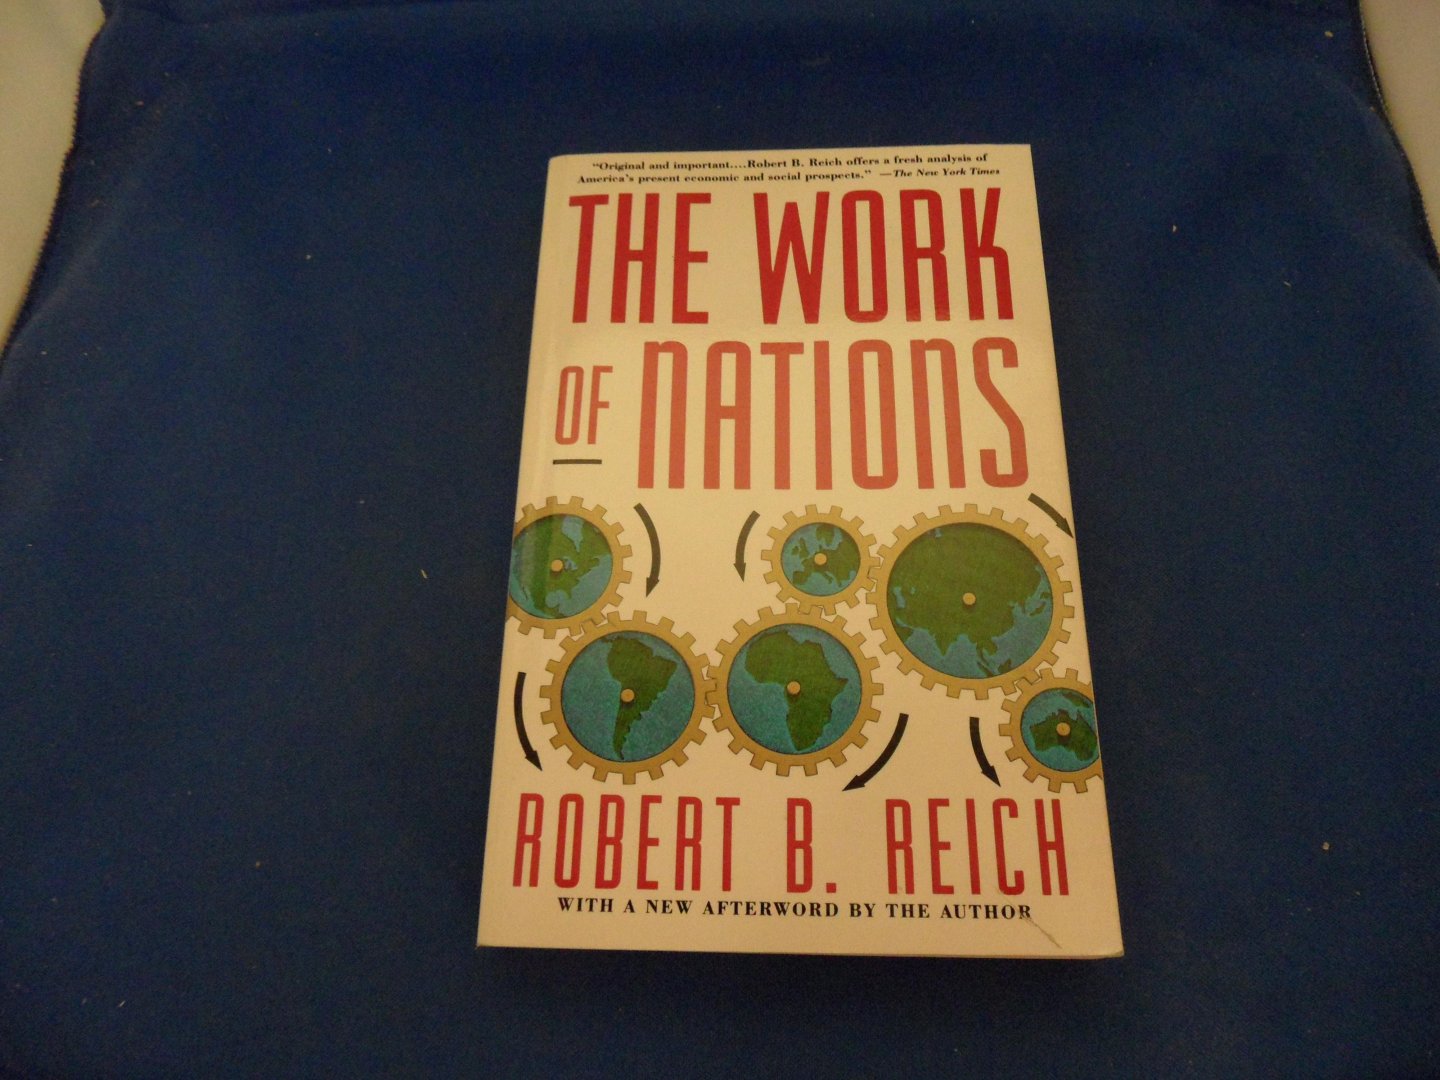 Reich, Robert B. - The work of Nations